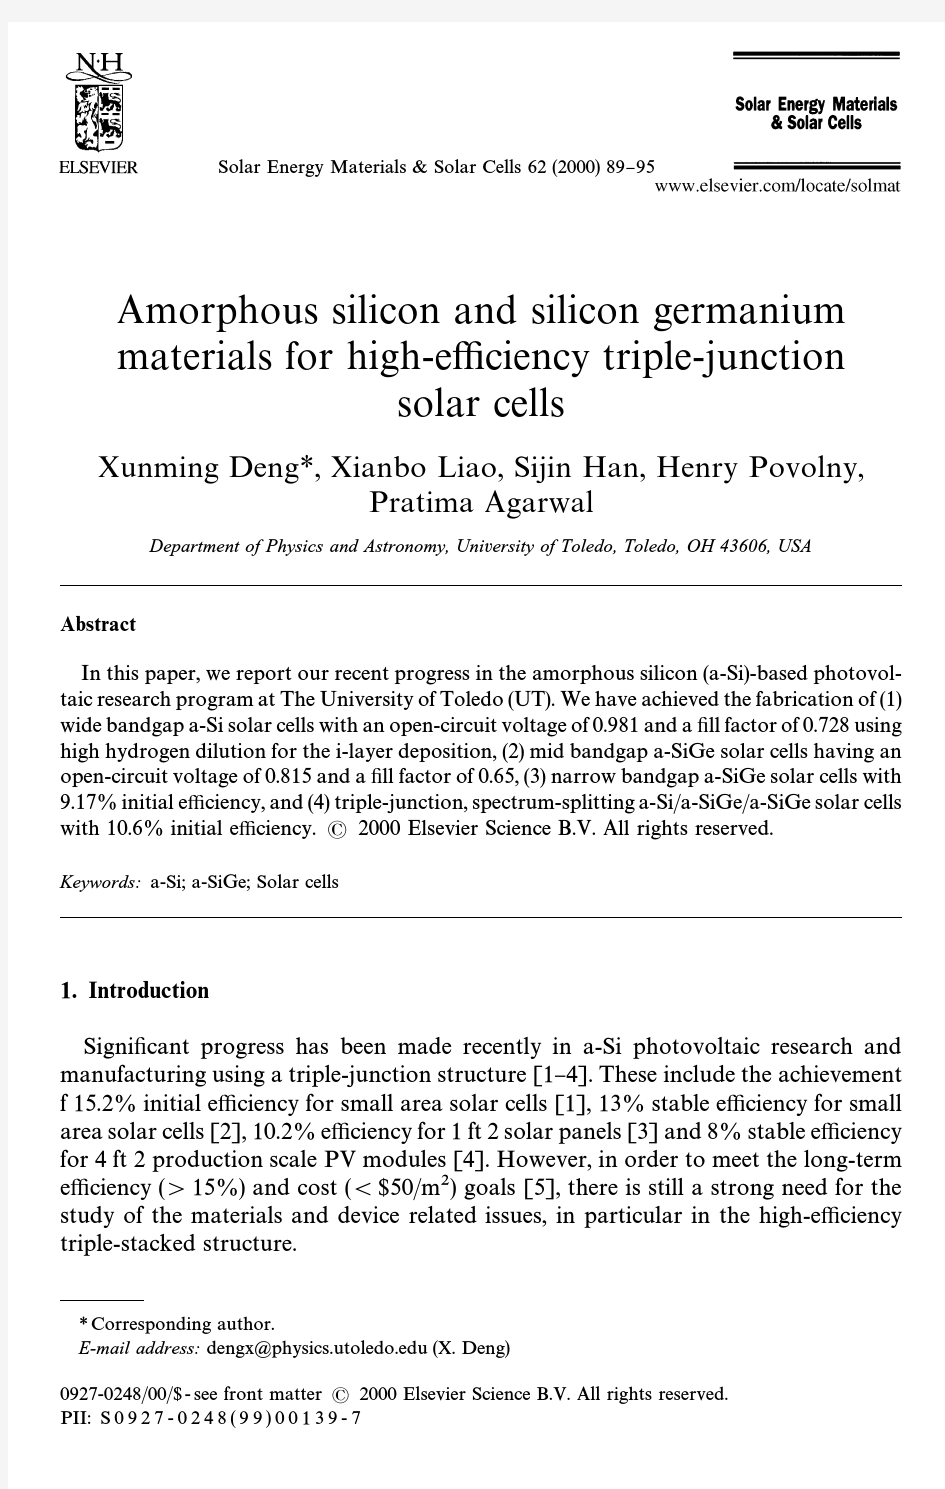 Amorphous silicon and silicon germanium materials for high-efficiency triple-junction solar cells